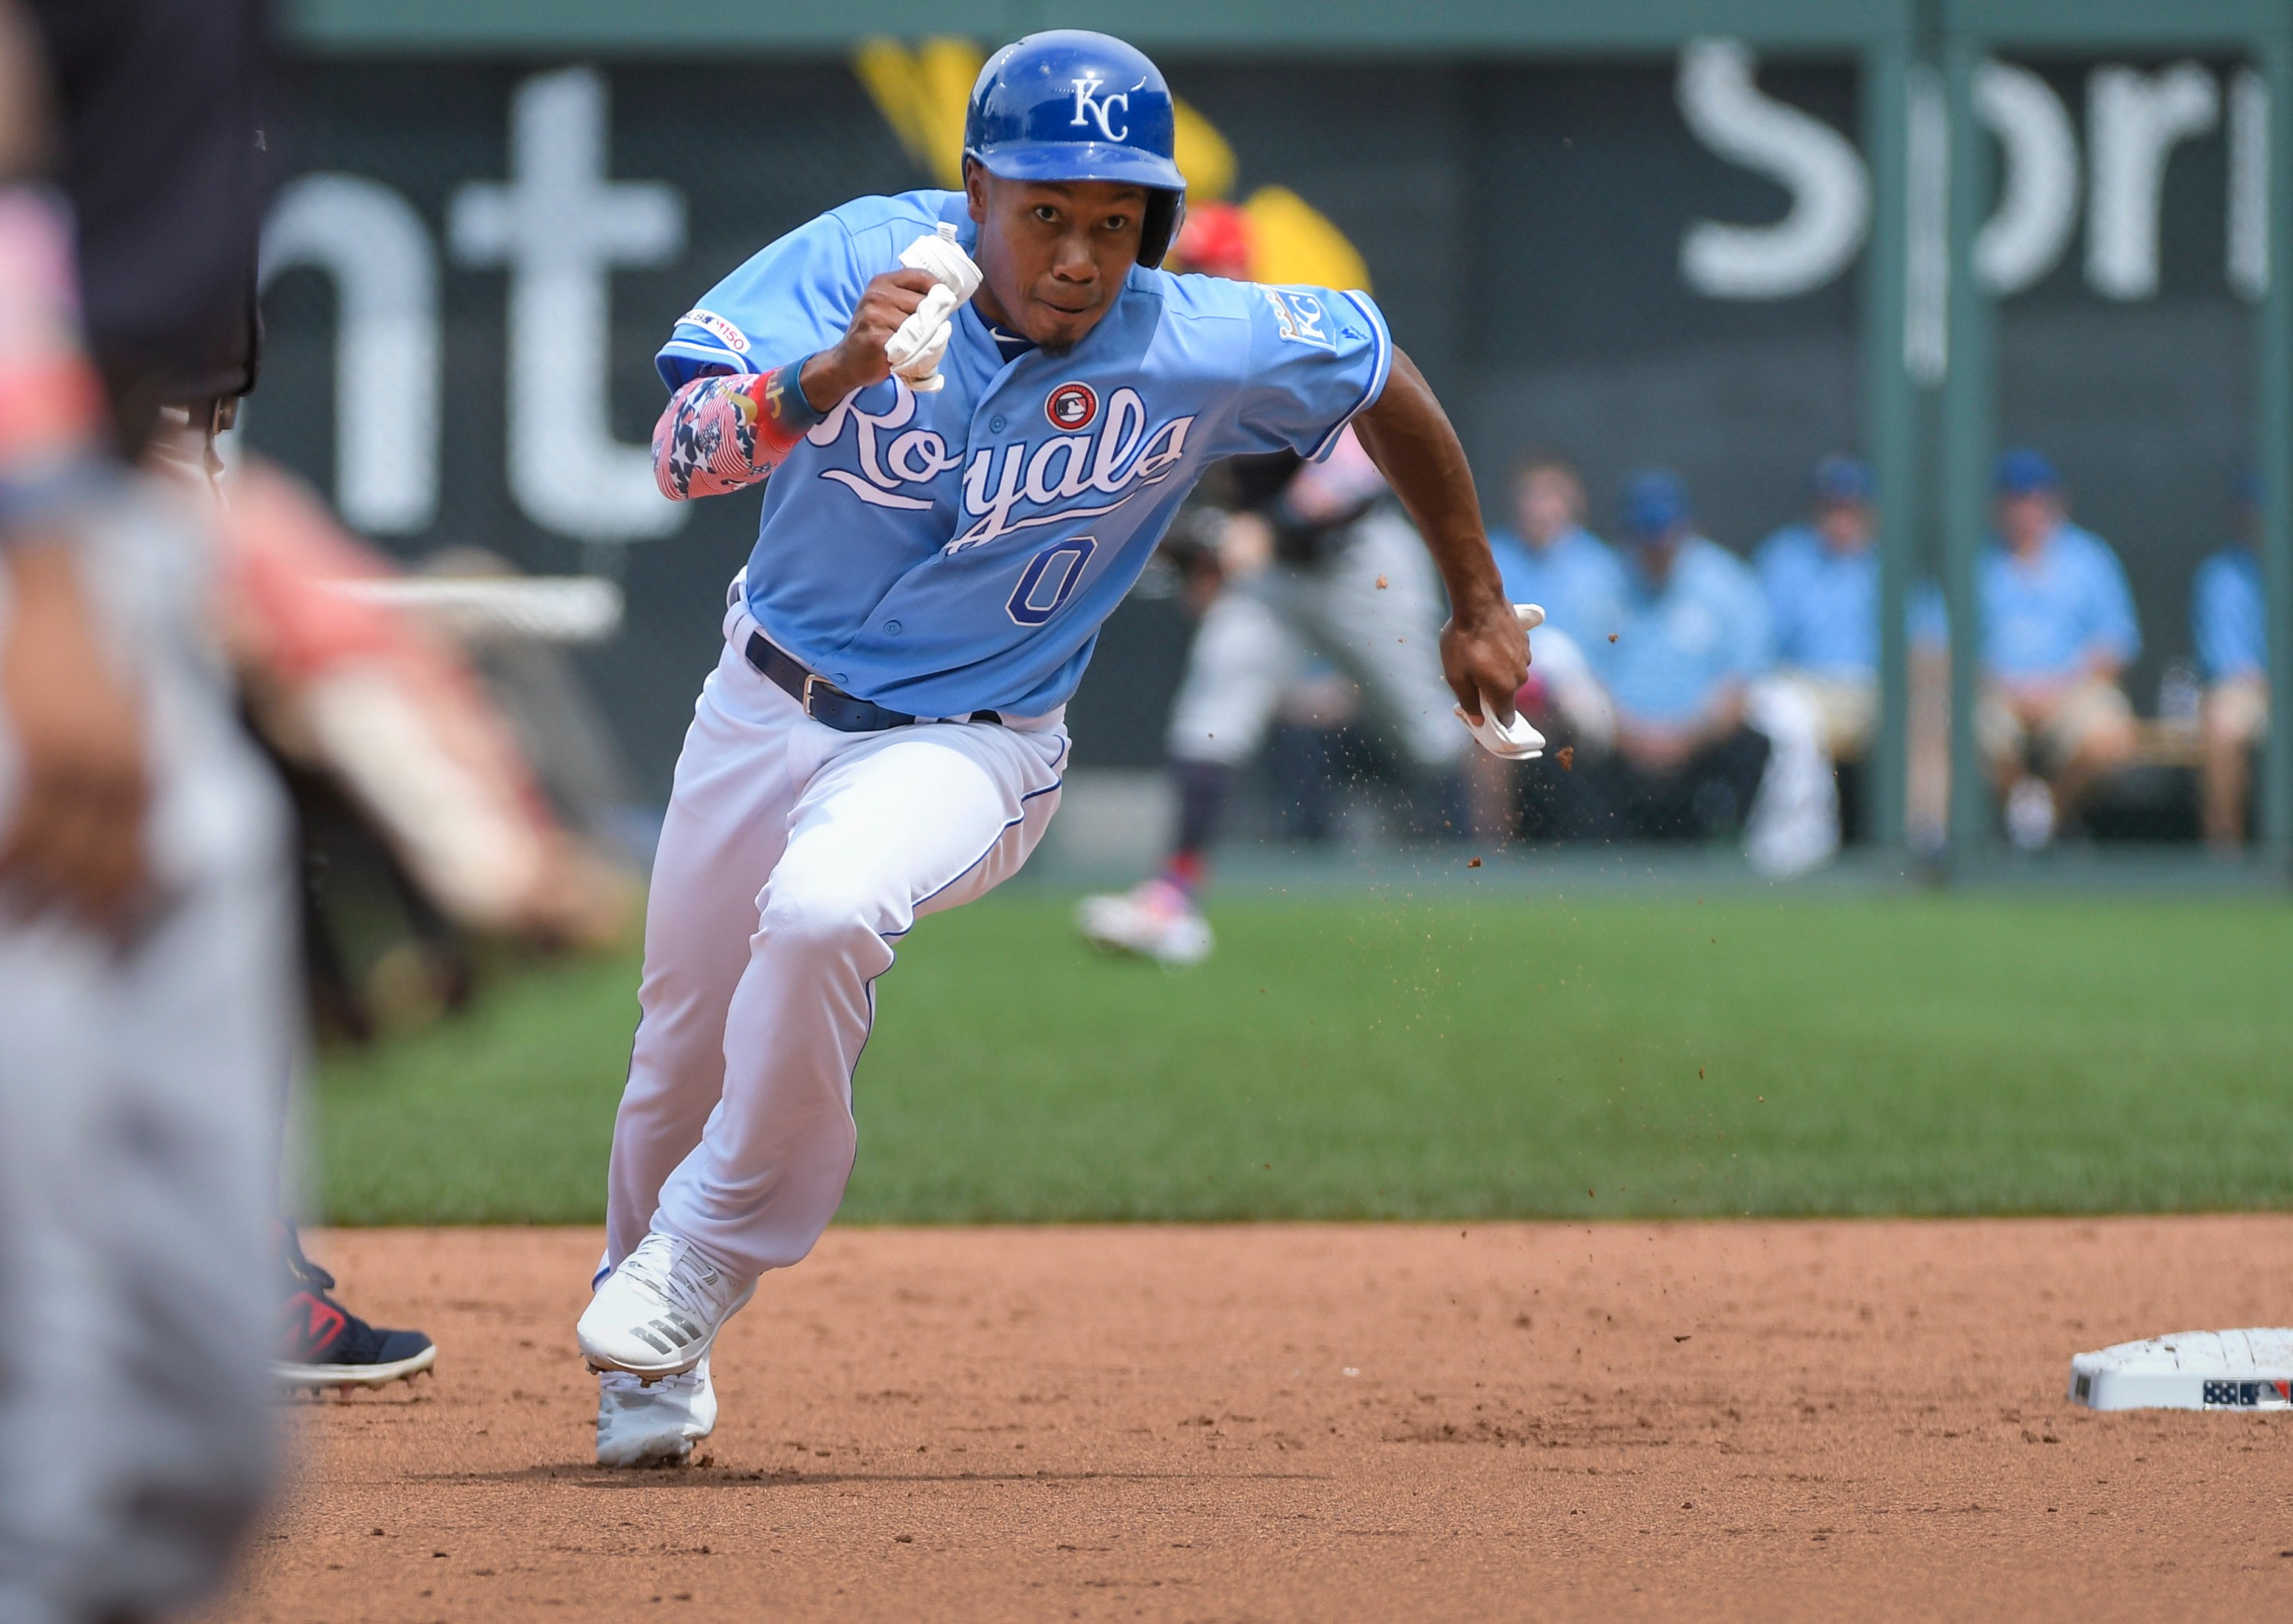 Terrance Gore taking an extra base, with a great deal of vigor, in a 2019 Royals game.